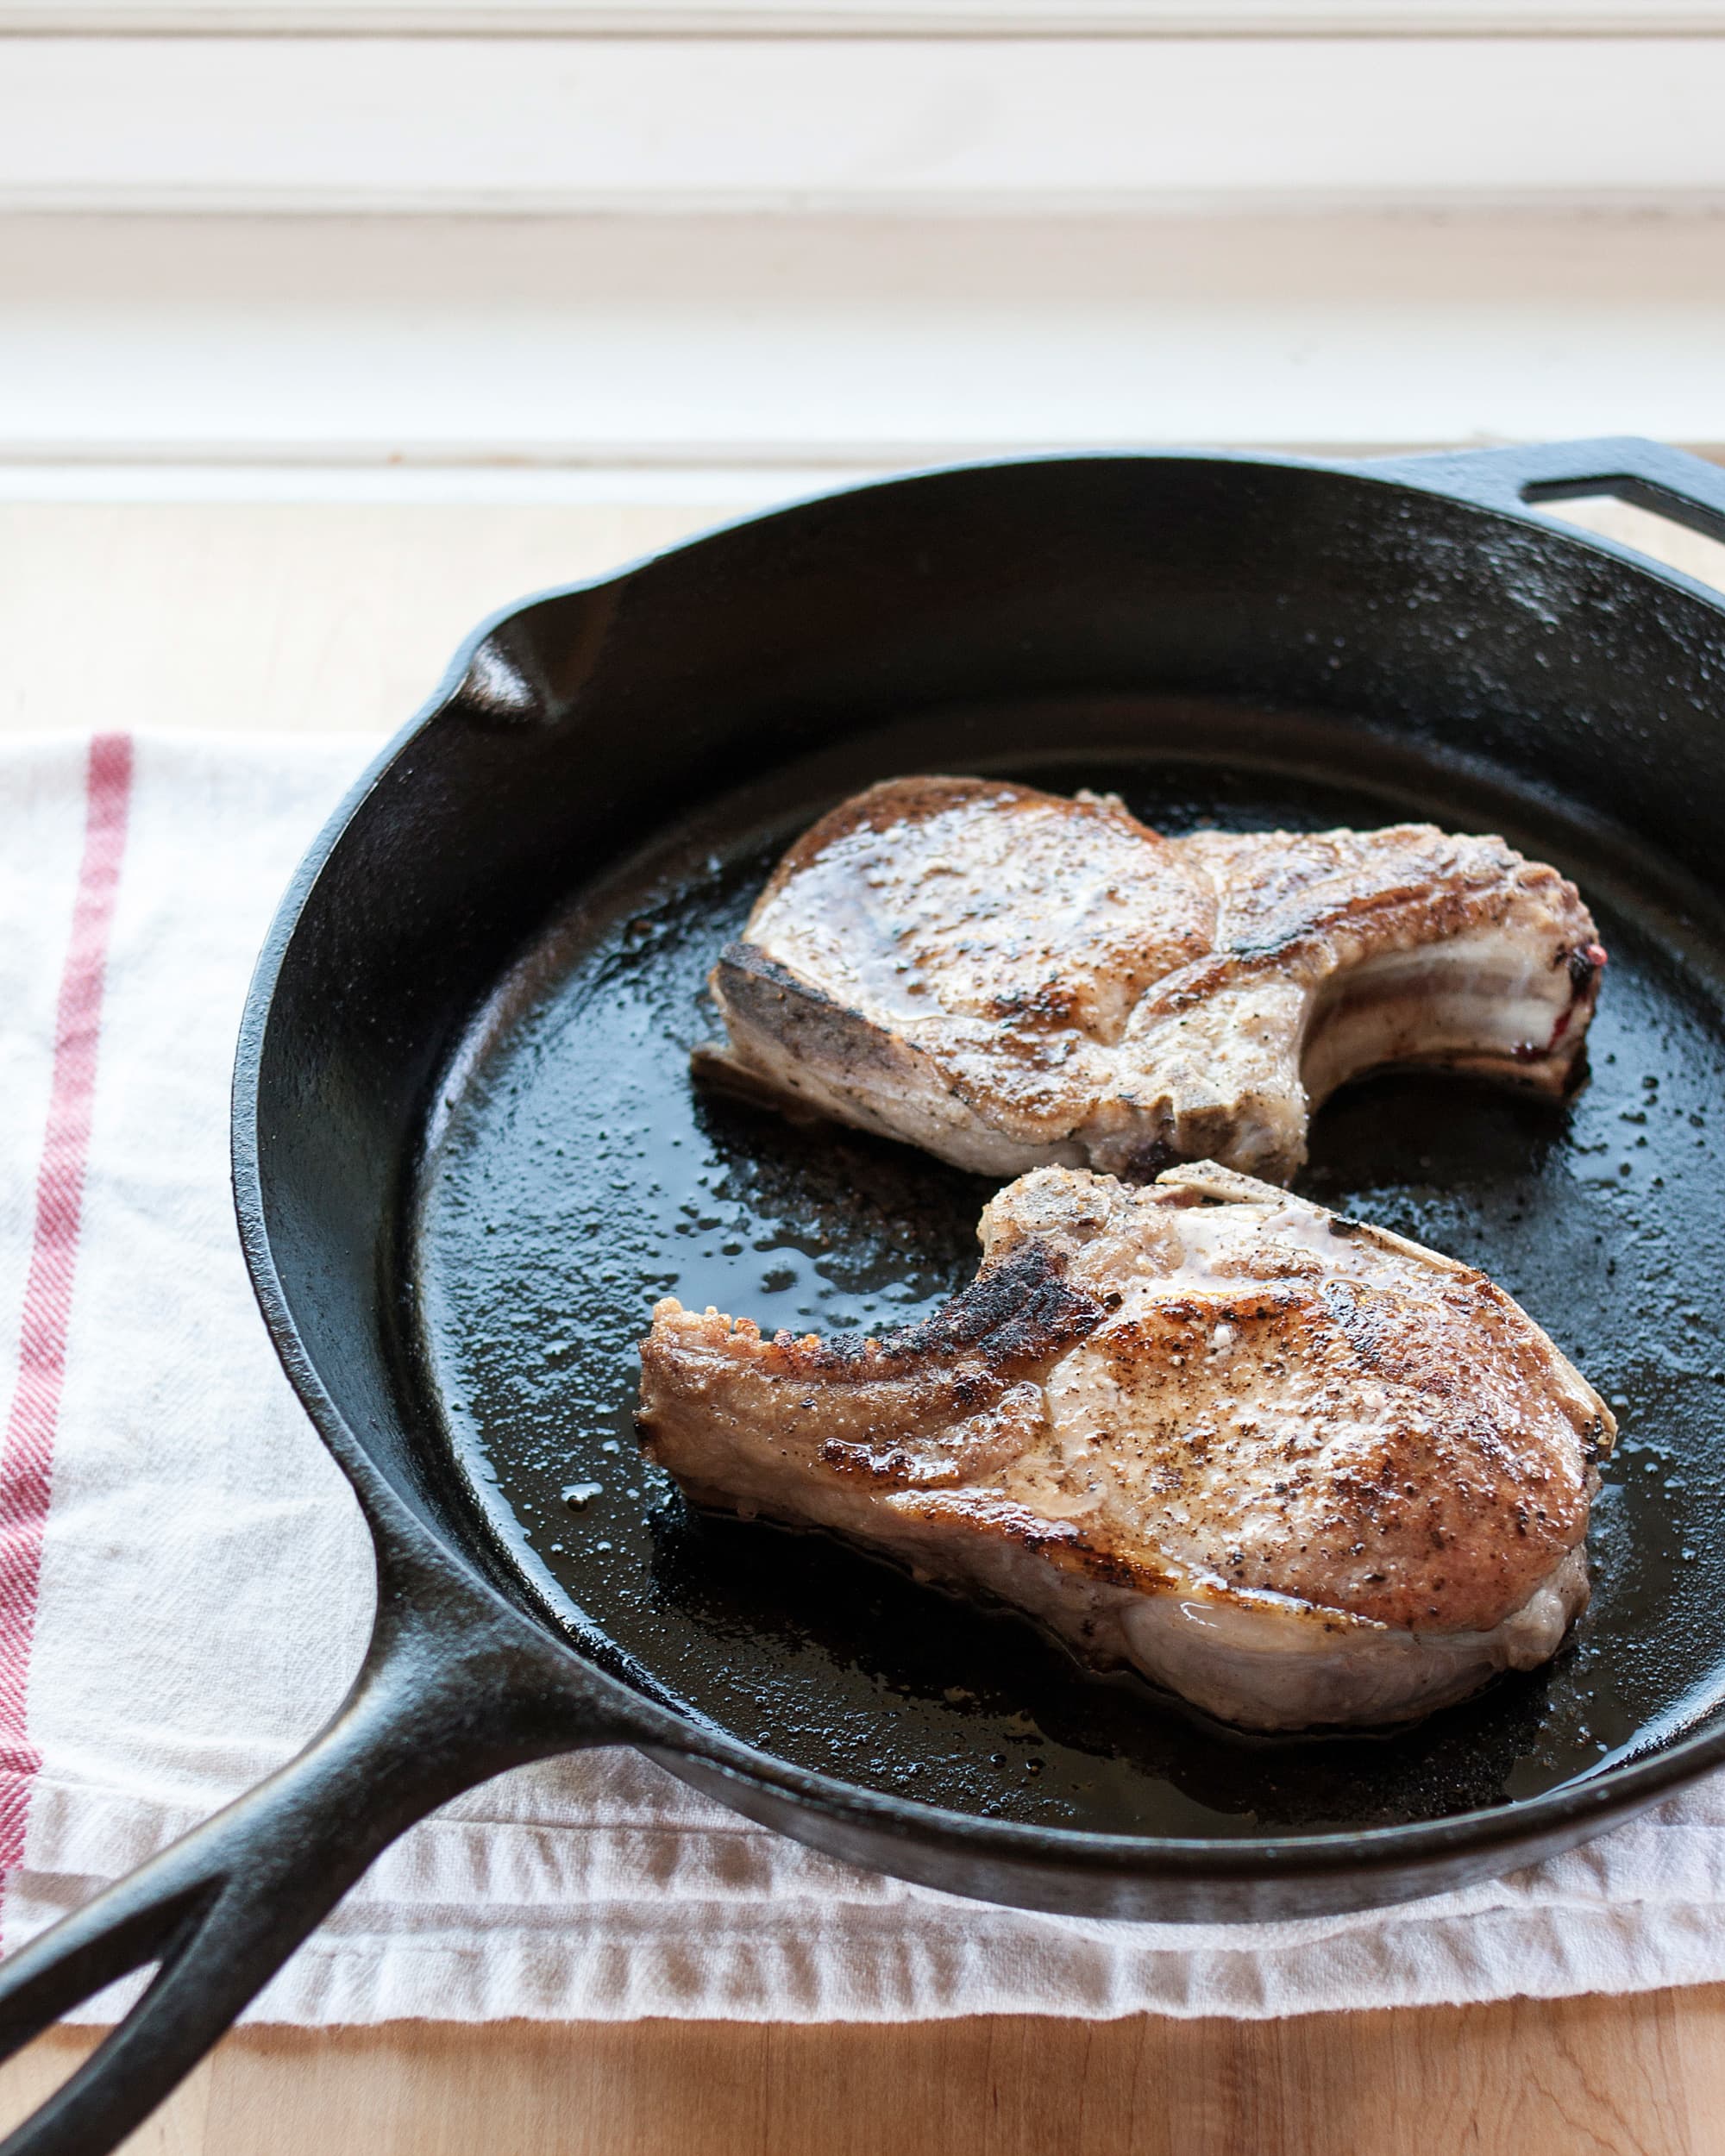 You Should Never Put Cold Meat In A Hot Pan. Here's Why